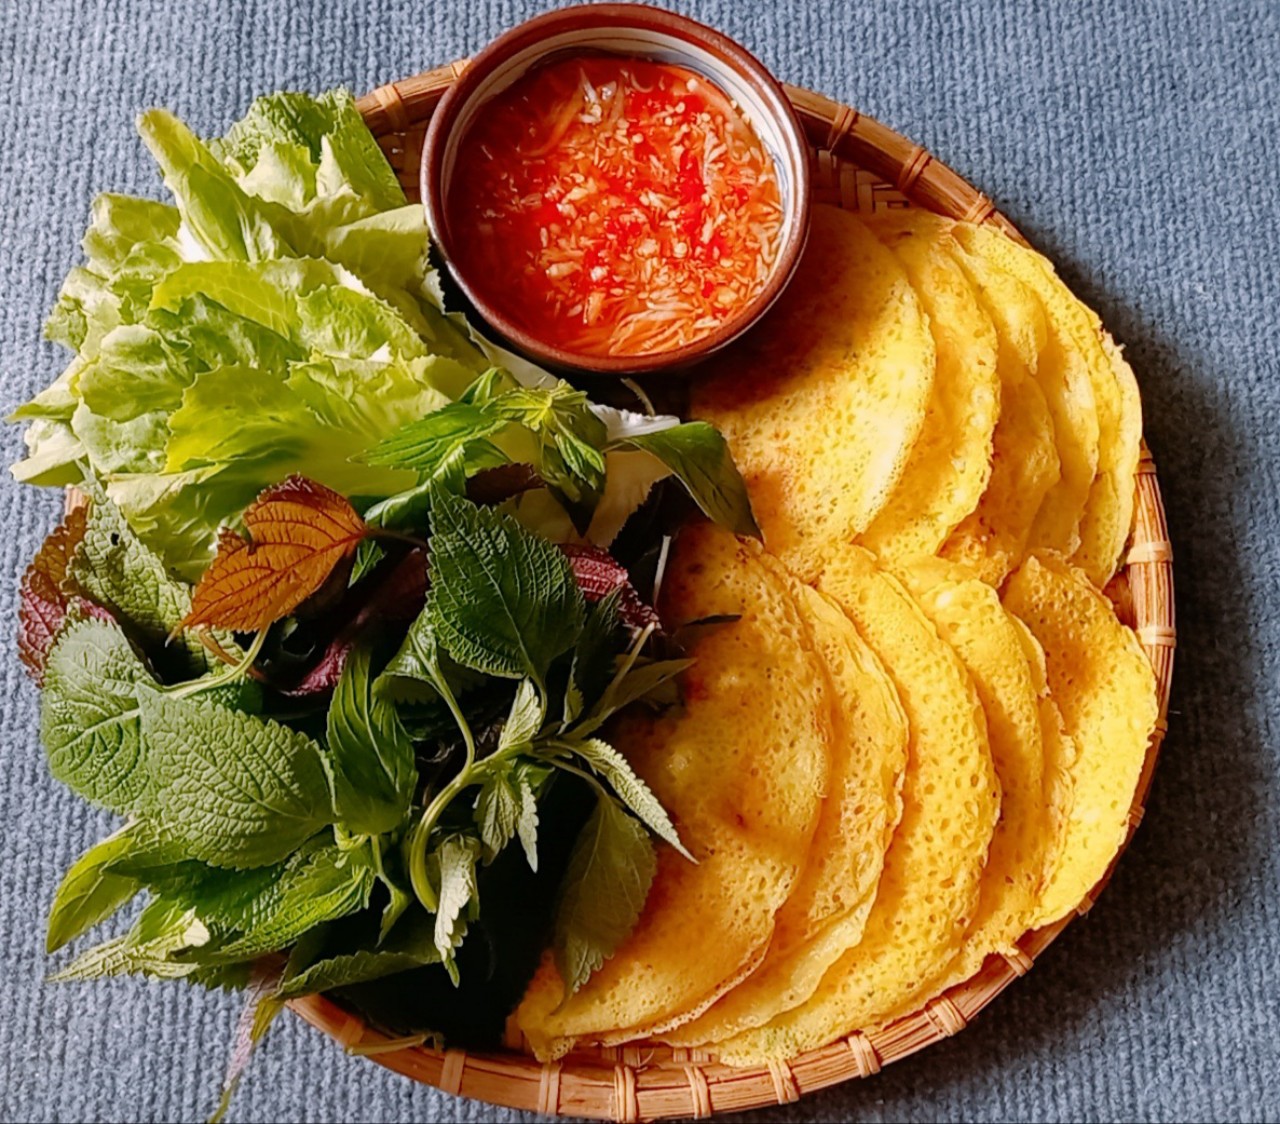 Eating Banh Xeo in Vietnam for a peanut allergy